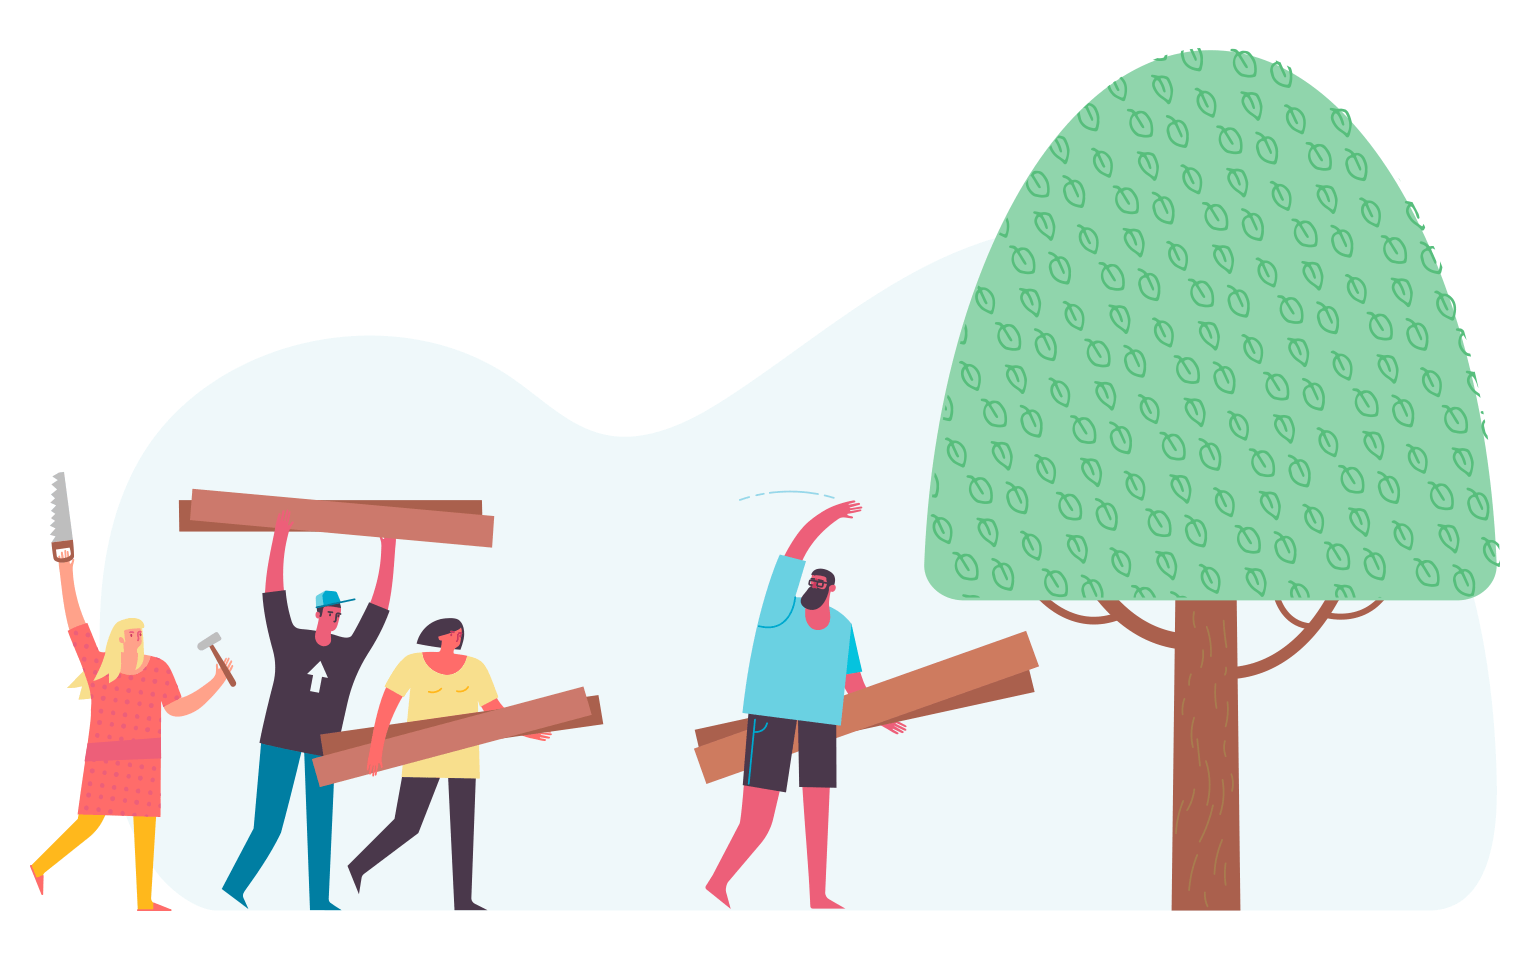 Illustration of a person beckoning to another group of people to help build a tree-house